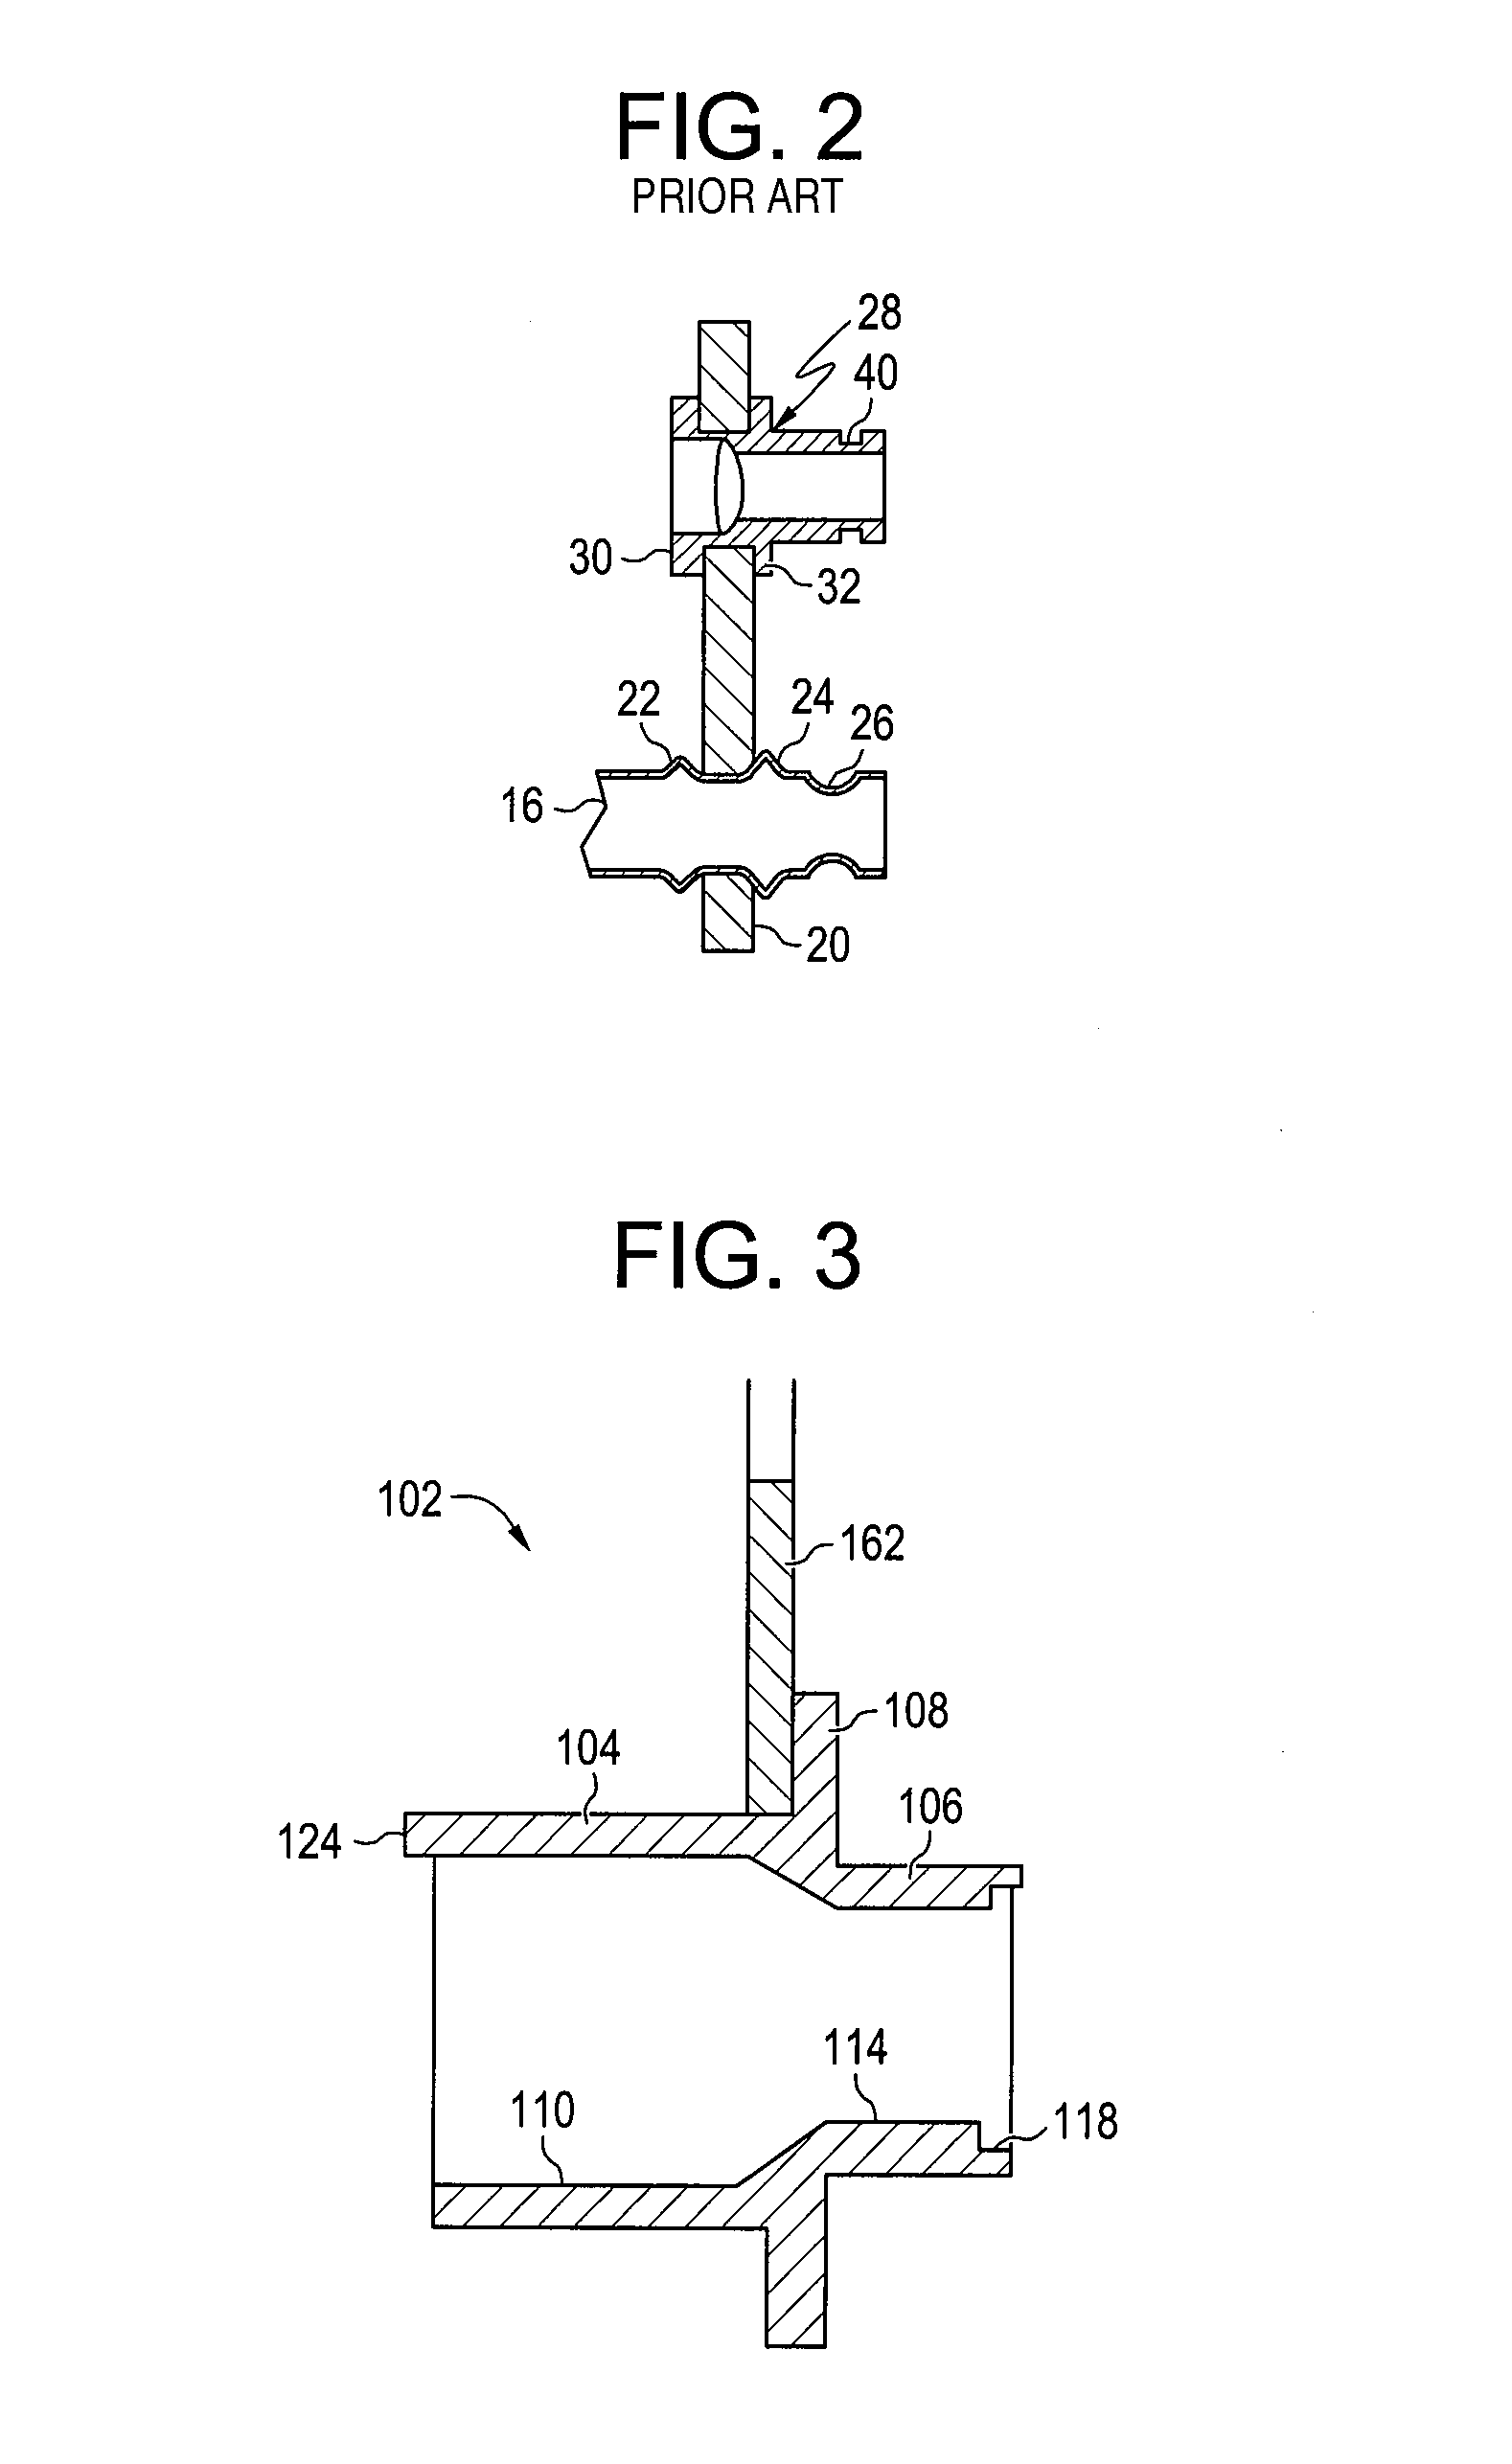 Method of determining the robustness of endformed tubular assembly and predicting the performance of such assembly in high pressure applications